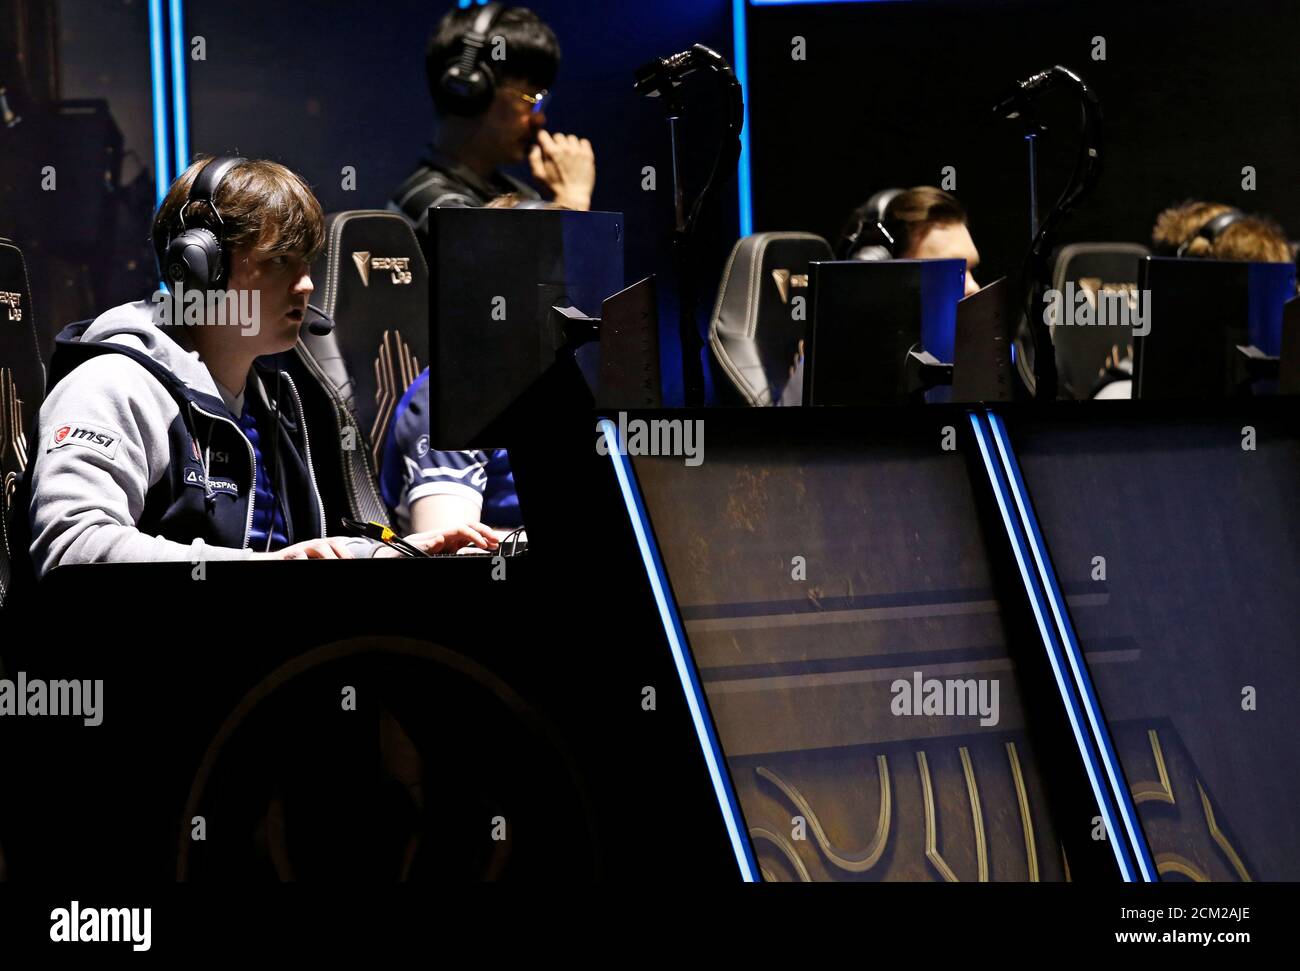 Members of Squadron battle against Phong Vu during the League of Legends (LOL) Mid-Season Invitational 2019 play-in group stage, in GG Stadium, Ho Chi Minh, 7, 2019. REUTERS/Kham